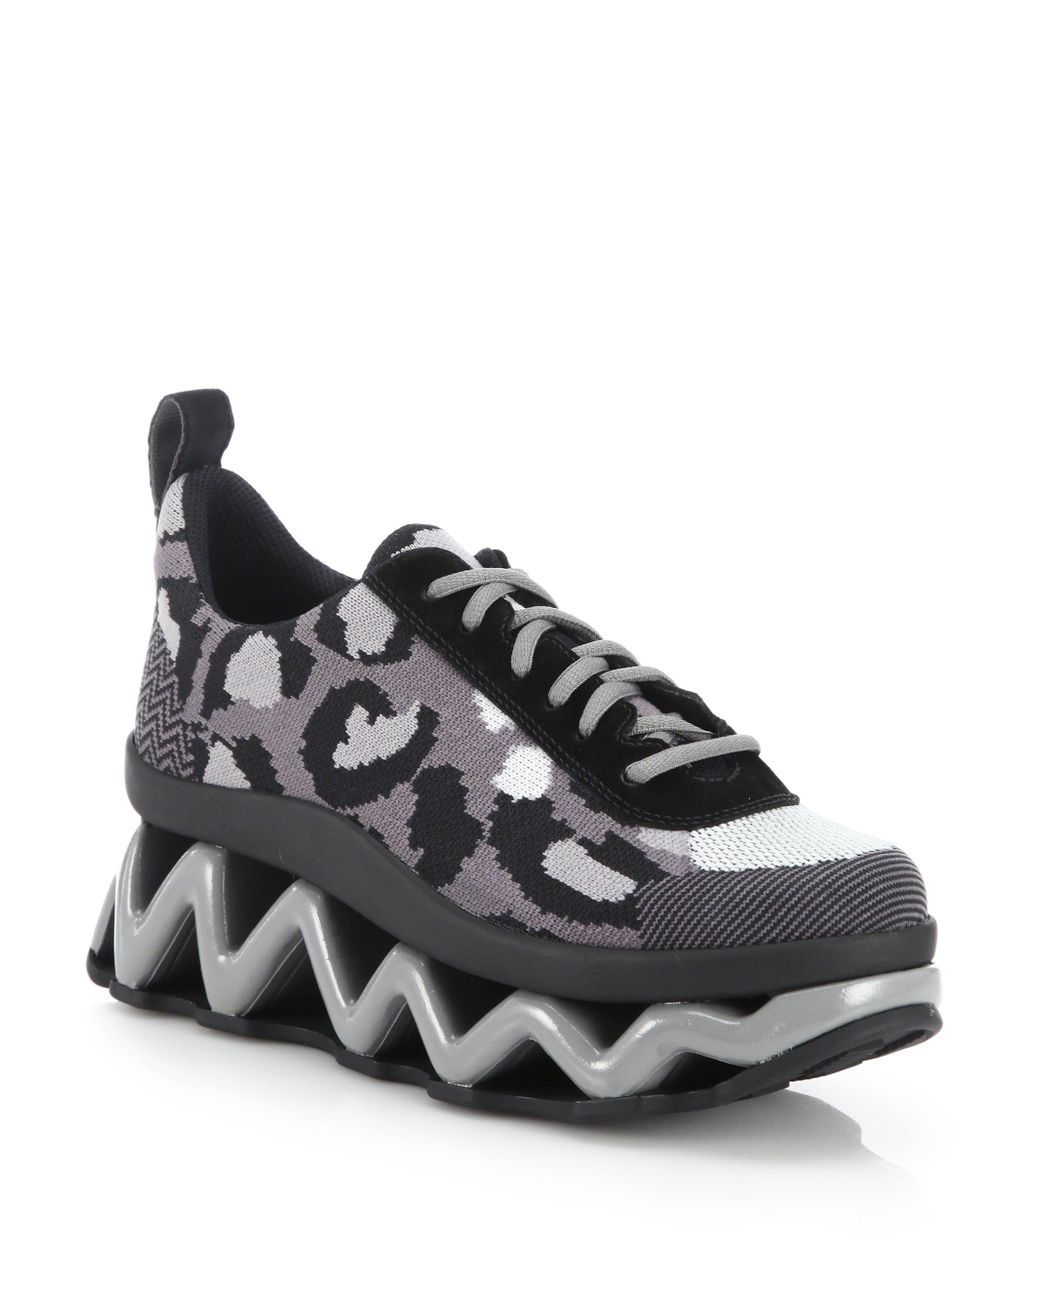 Marc By Marc Jacobs Ninja Wave Textile & Leather Platform Sneakers in Black  | Lyst